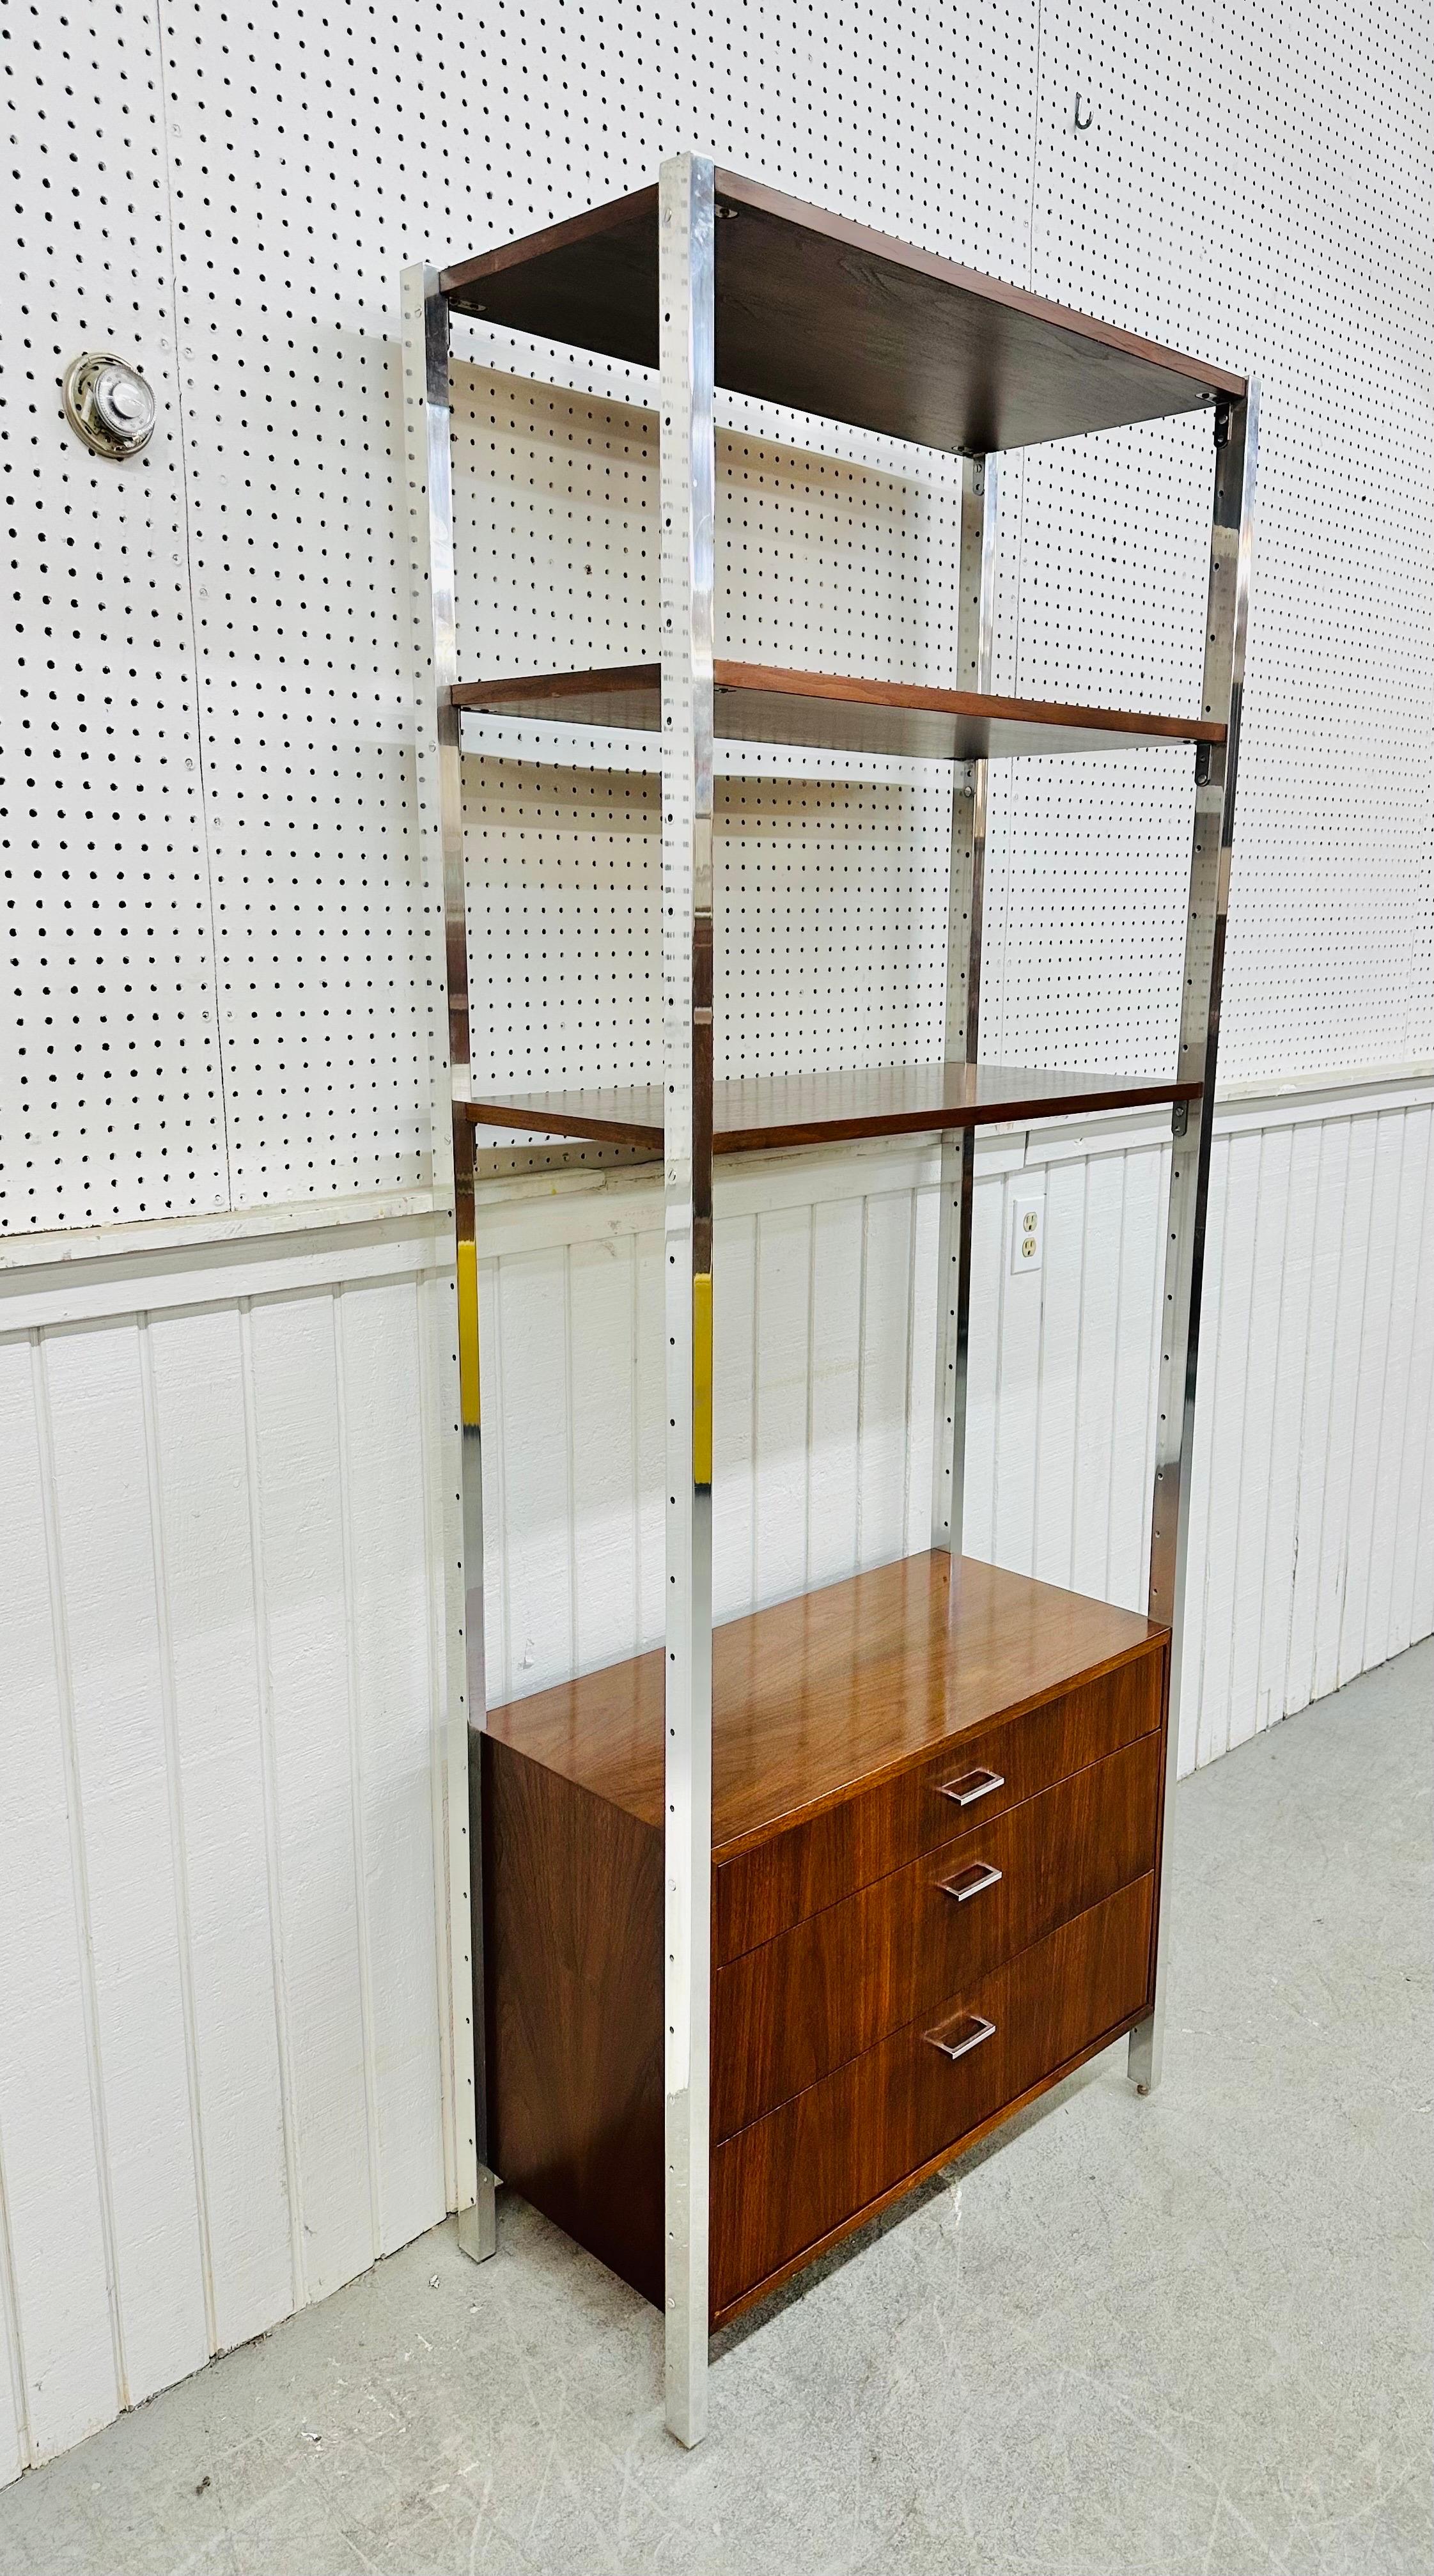 This listing is for a Mid-Century Modern Founders Chrome & Walnut Etagere. Featuring a straight line design, floating walnut chest of three drawers, walnut shelves, chrome pillars, and original chrome hardware. This is an exceptional combination of